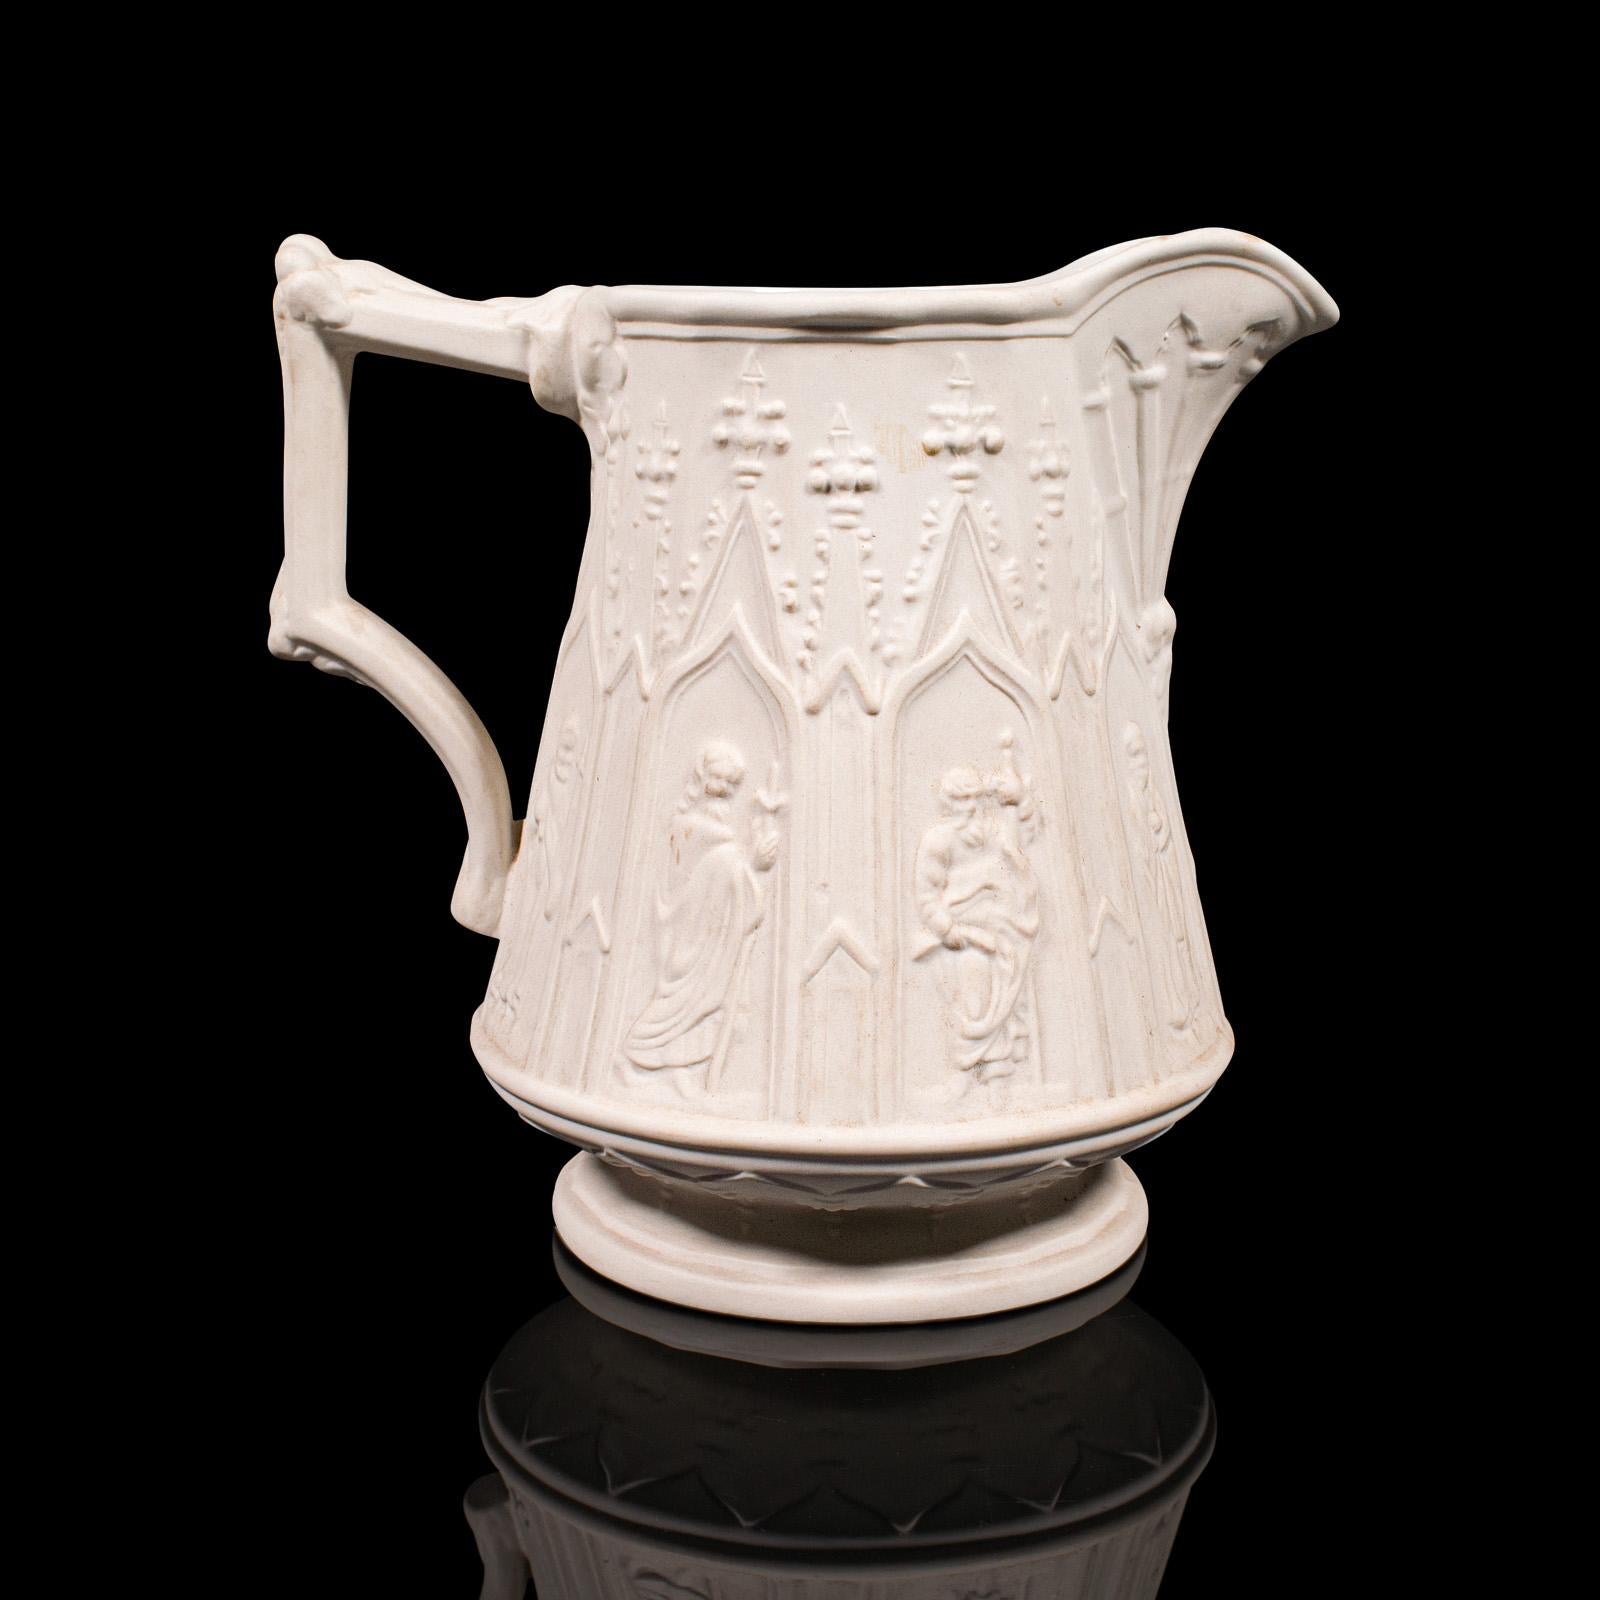 This is a vintage pouring jug. An English, Parian Ware ceramic serving creamer, dating to the late 20th century, circa 1980.

Appealing Parian Ware form, with charming decorative relief
Displays a desirable aged patina and in good original